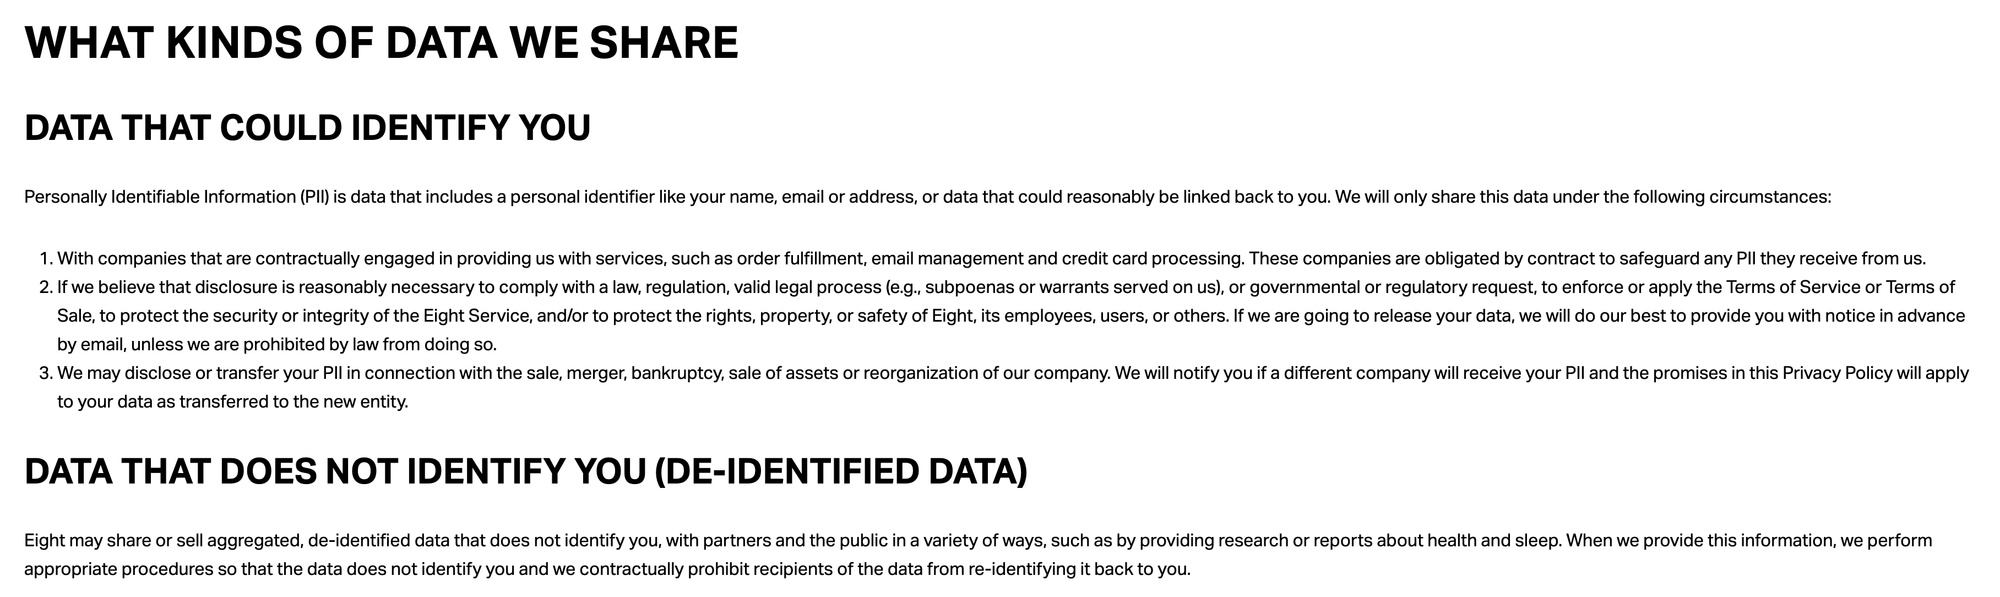 De-identified data that does not identify you may be used to inform the health and scientific community about trends; for marketing and promotional use; or for sale to interested audiences. See "Sharing of De-identified Data That Does Not Identify You" to learn more. WHAT KINDS OF DATA WE SHARE DATA THAT COULD IDENTIFY YOU Personally Identifiable Information (PII) is data that includes a personal identifier like your name, email or address, or data that could reasonably be linked back to you. We will only share this data under the following circumstances:  With companies that are contractually engaged in providing us with services, such as order fulfillment, email management and credit card processing. These companies are obligated by contract to safeguard any PII they receive from us. If we believe that disclosure is reasonably necessary to comply with a law, regulation, valid legal process (e.g., subpoenas or warrants served on us), or governmental or regulatory request, to enforce or apply the Terms of Service or Terms of Sale, to protect the security or integrity of the Eight Service, and/or to protect the rights, property, or safety of Eight, its employees, users, or others. If we are going to release your data, we will do our best to provide you with notice in advance by email, unless we are prohibited by law from doing so. We may disclose or transfer your PII in connection with the sale, merger, bankruptcy, sale of assets or reorganization of our company. We will notify you if a different company will receive your PII and the promises in this Privacy Policy will apply to your data as transferred to the new entity.